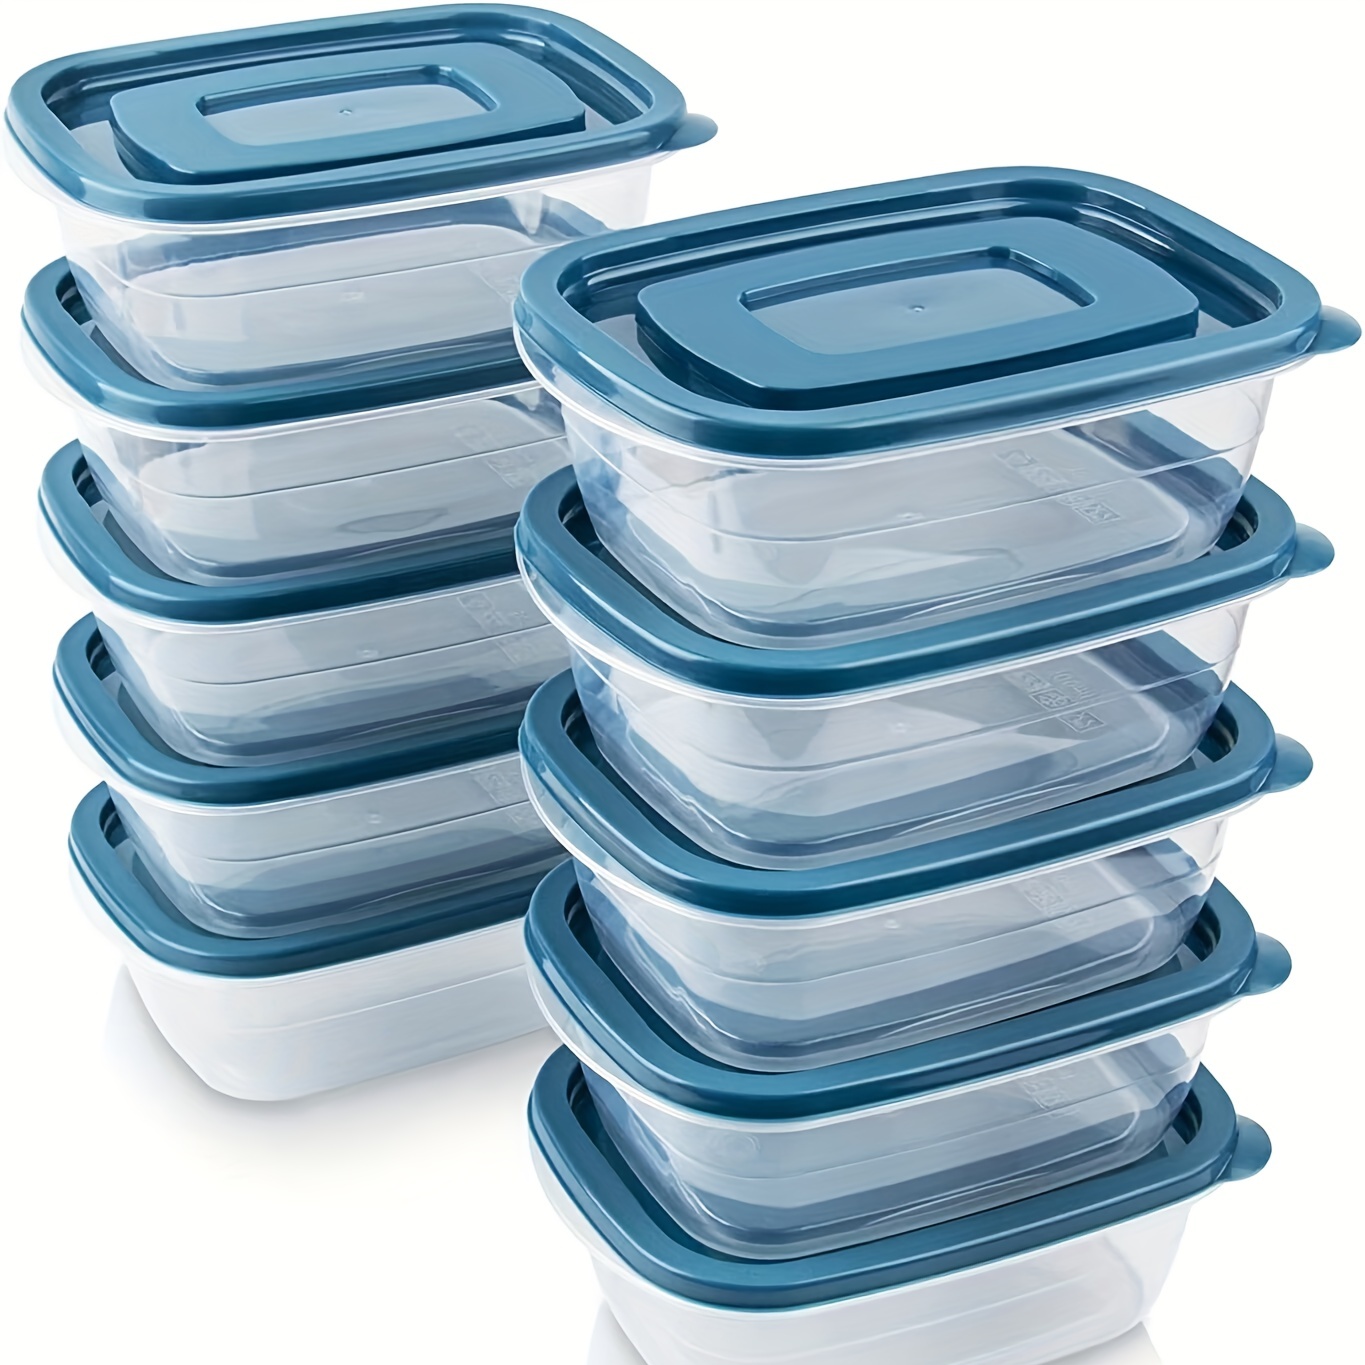 10pcs Rectangular Plastic Partial Boxes Set With Lids, 0.53 Quarts Per Box,  Food Storage Box, Food Container, Plastic Container, For School, Work, And